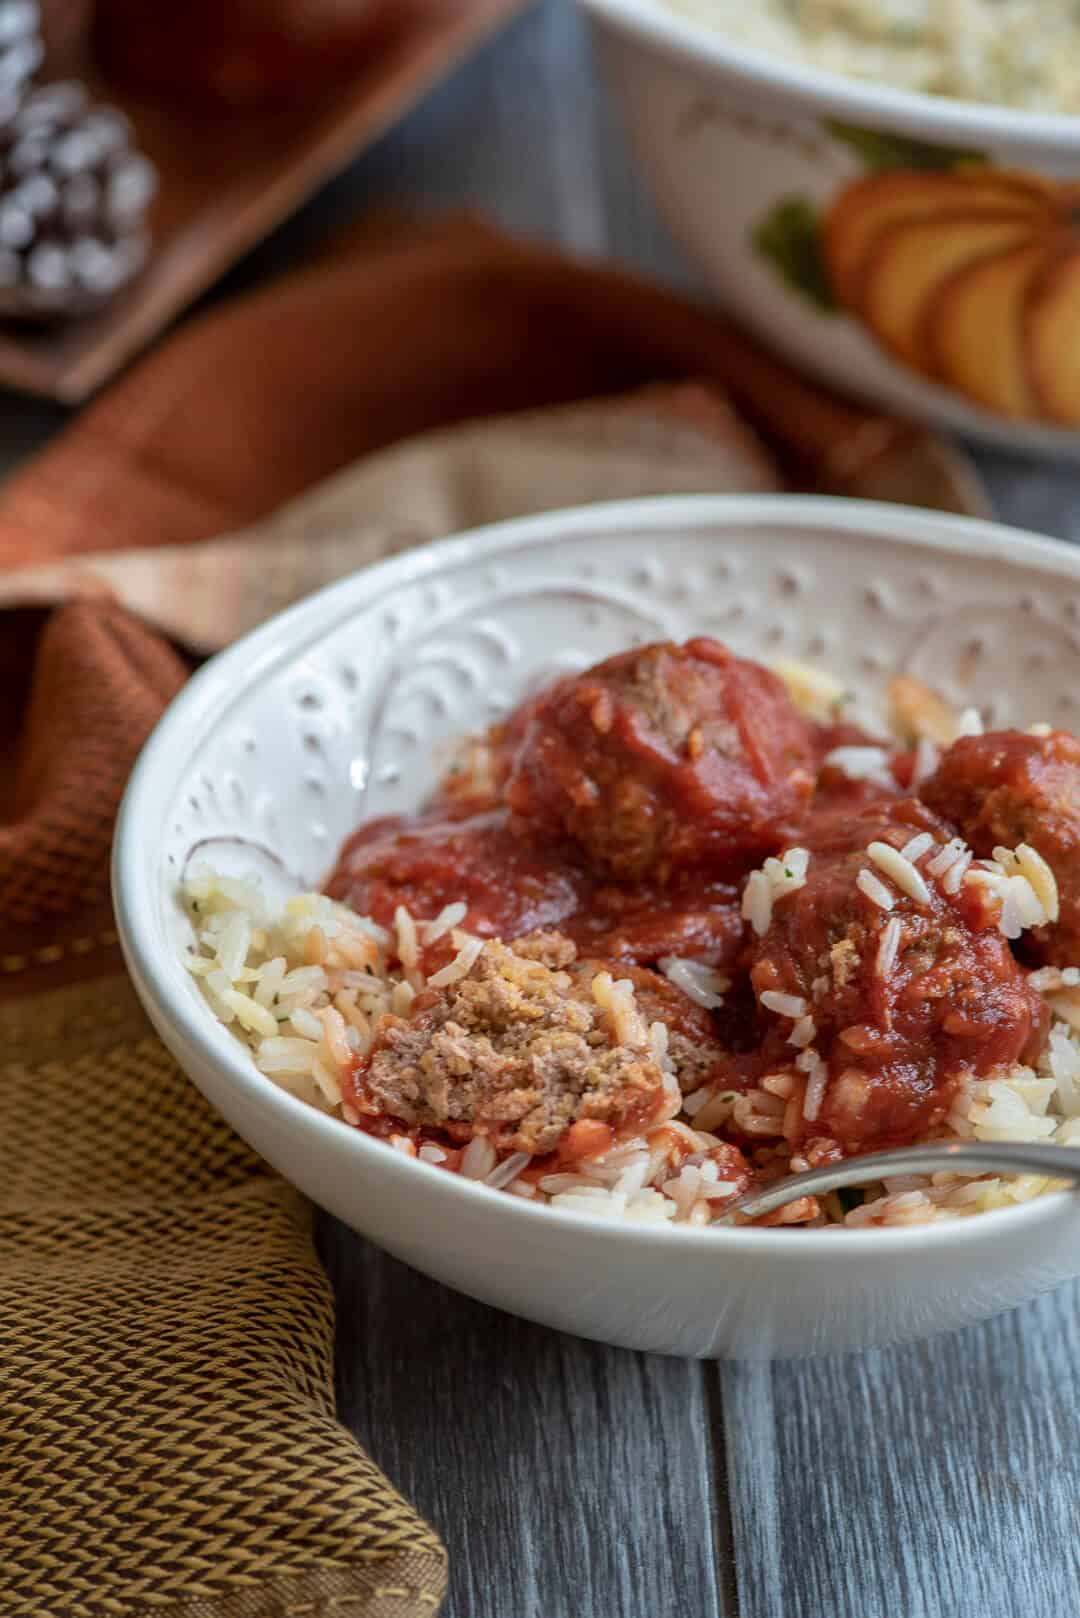 A fork breaks into one of the meatballs in the white bowl.